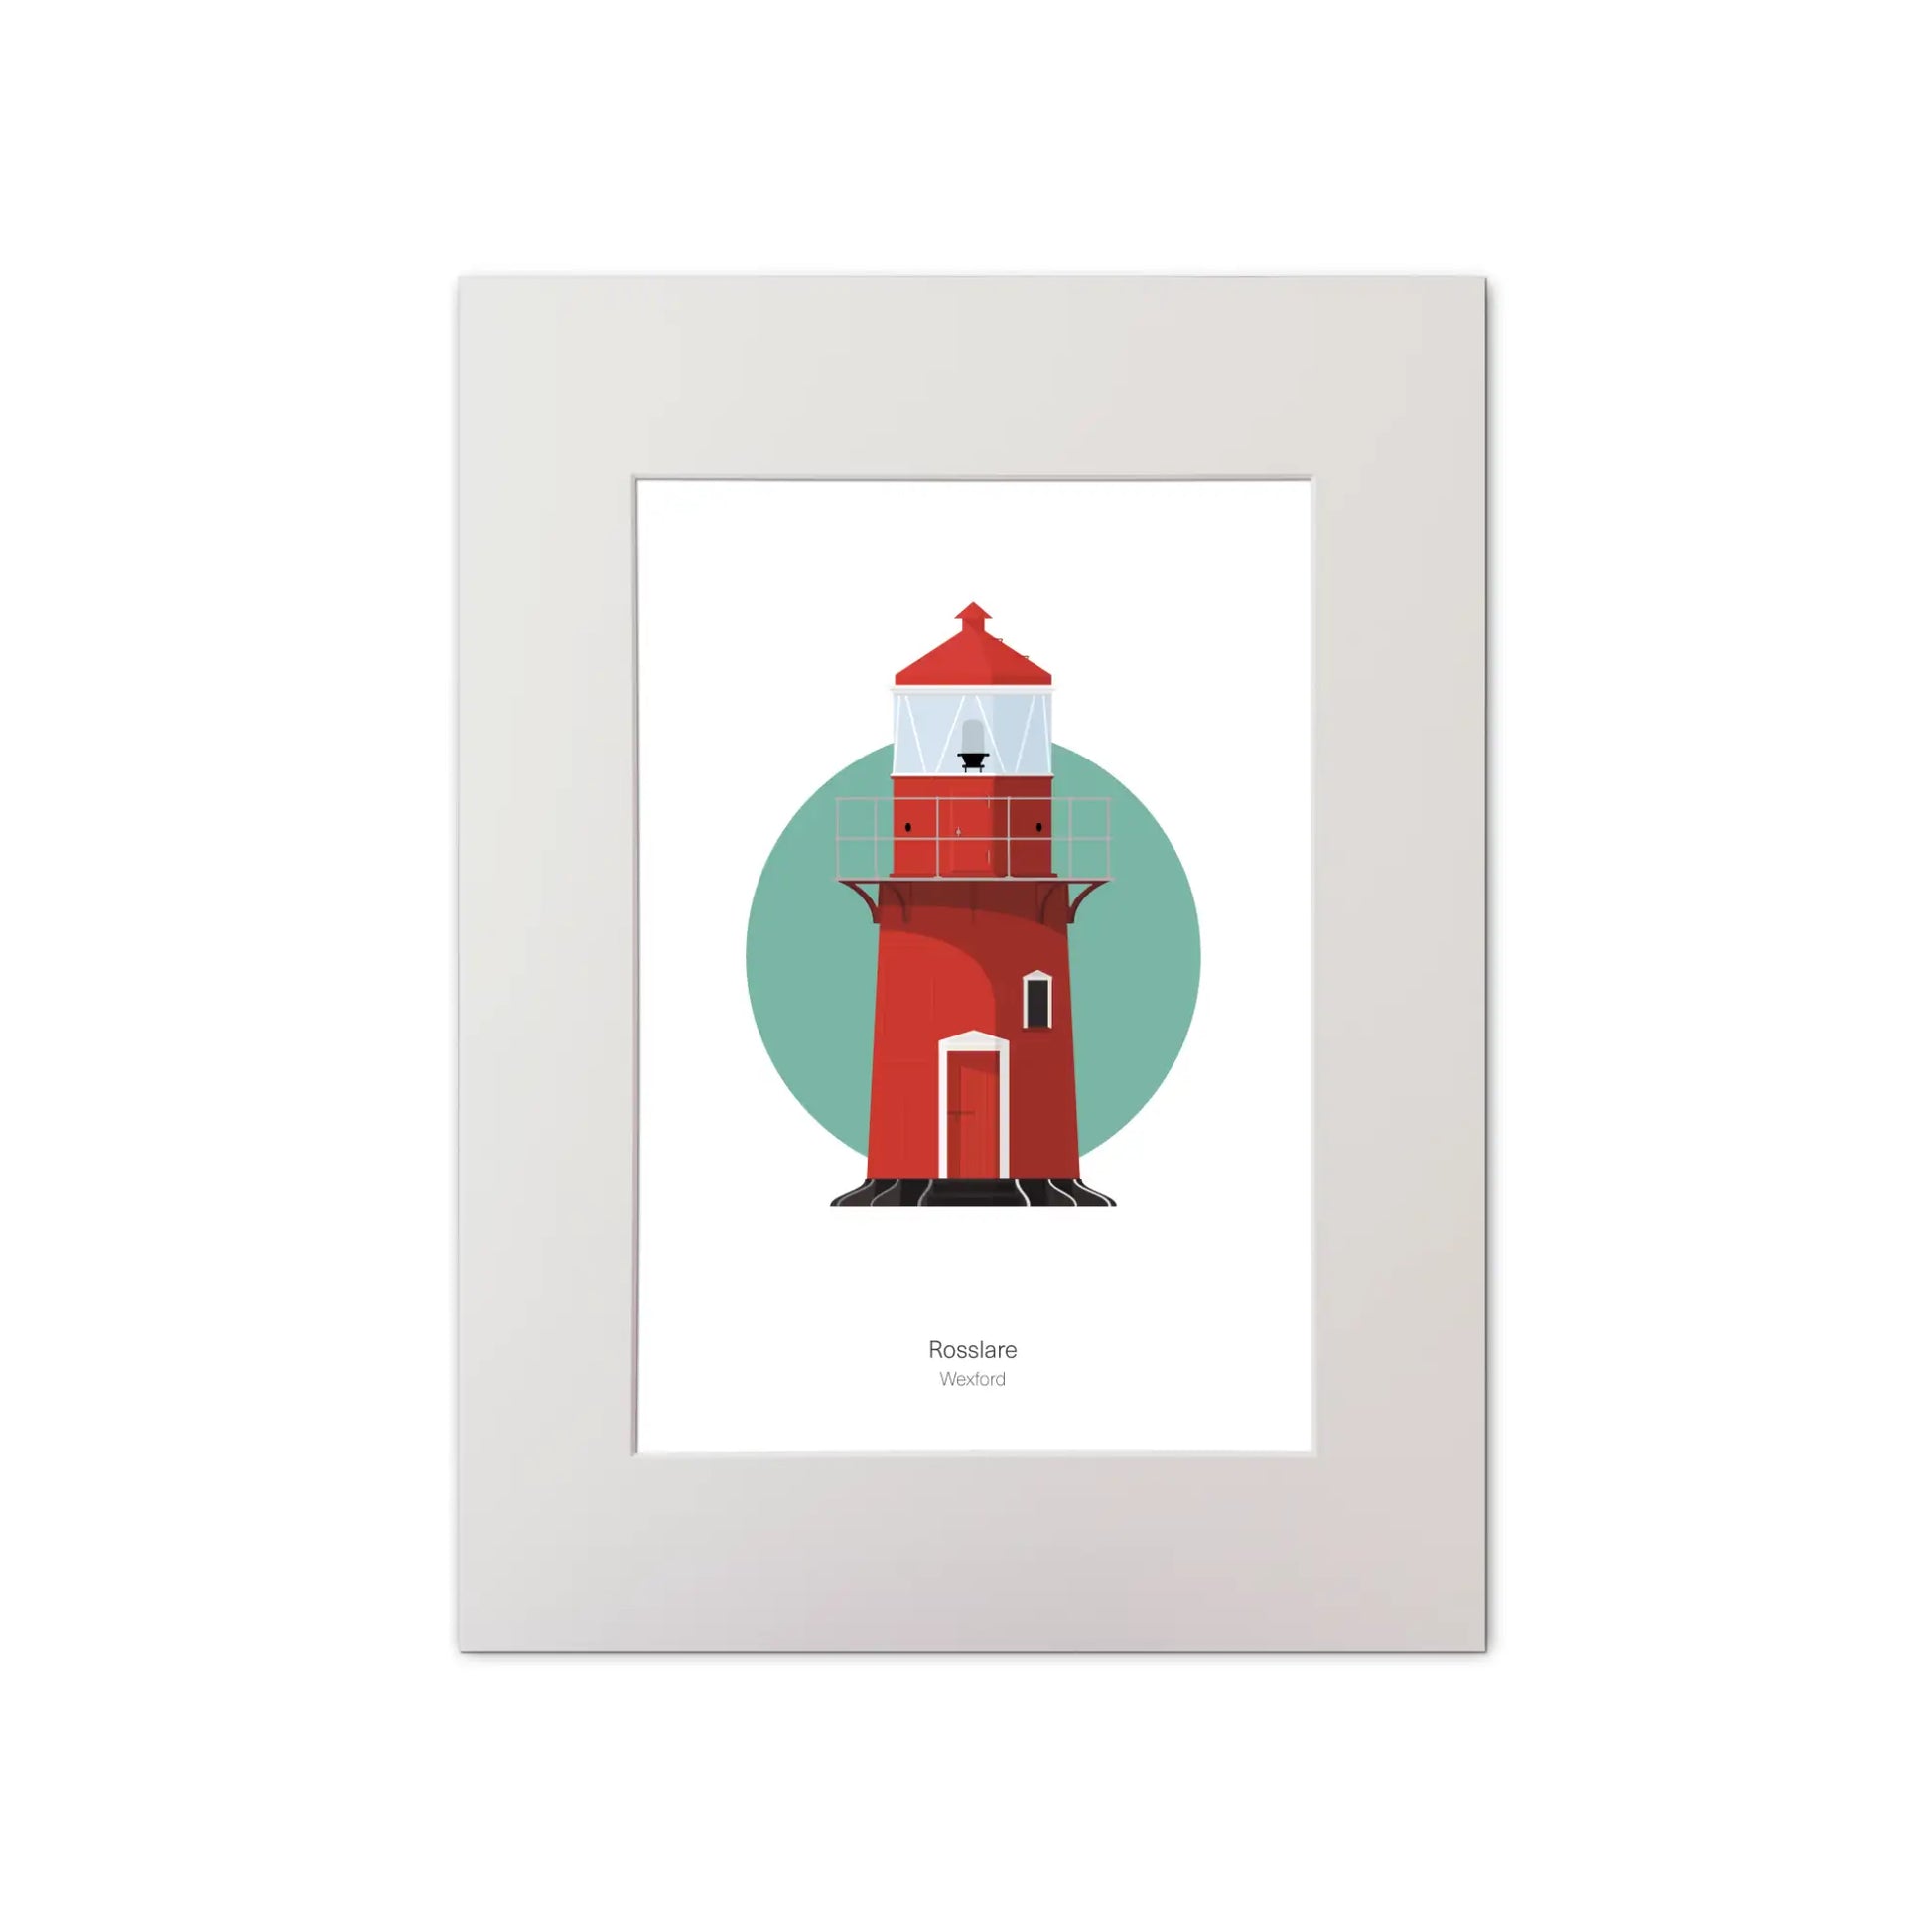 Illustration of Rosslare Harbour lighthouse on a white background inside light blue square, mounted and measuring 30x40cm.